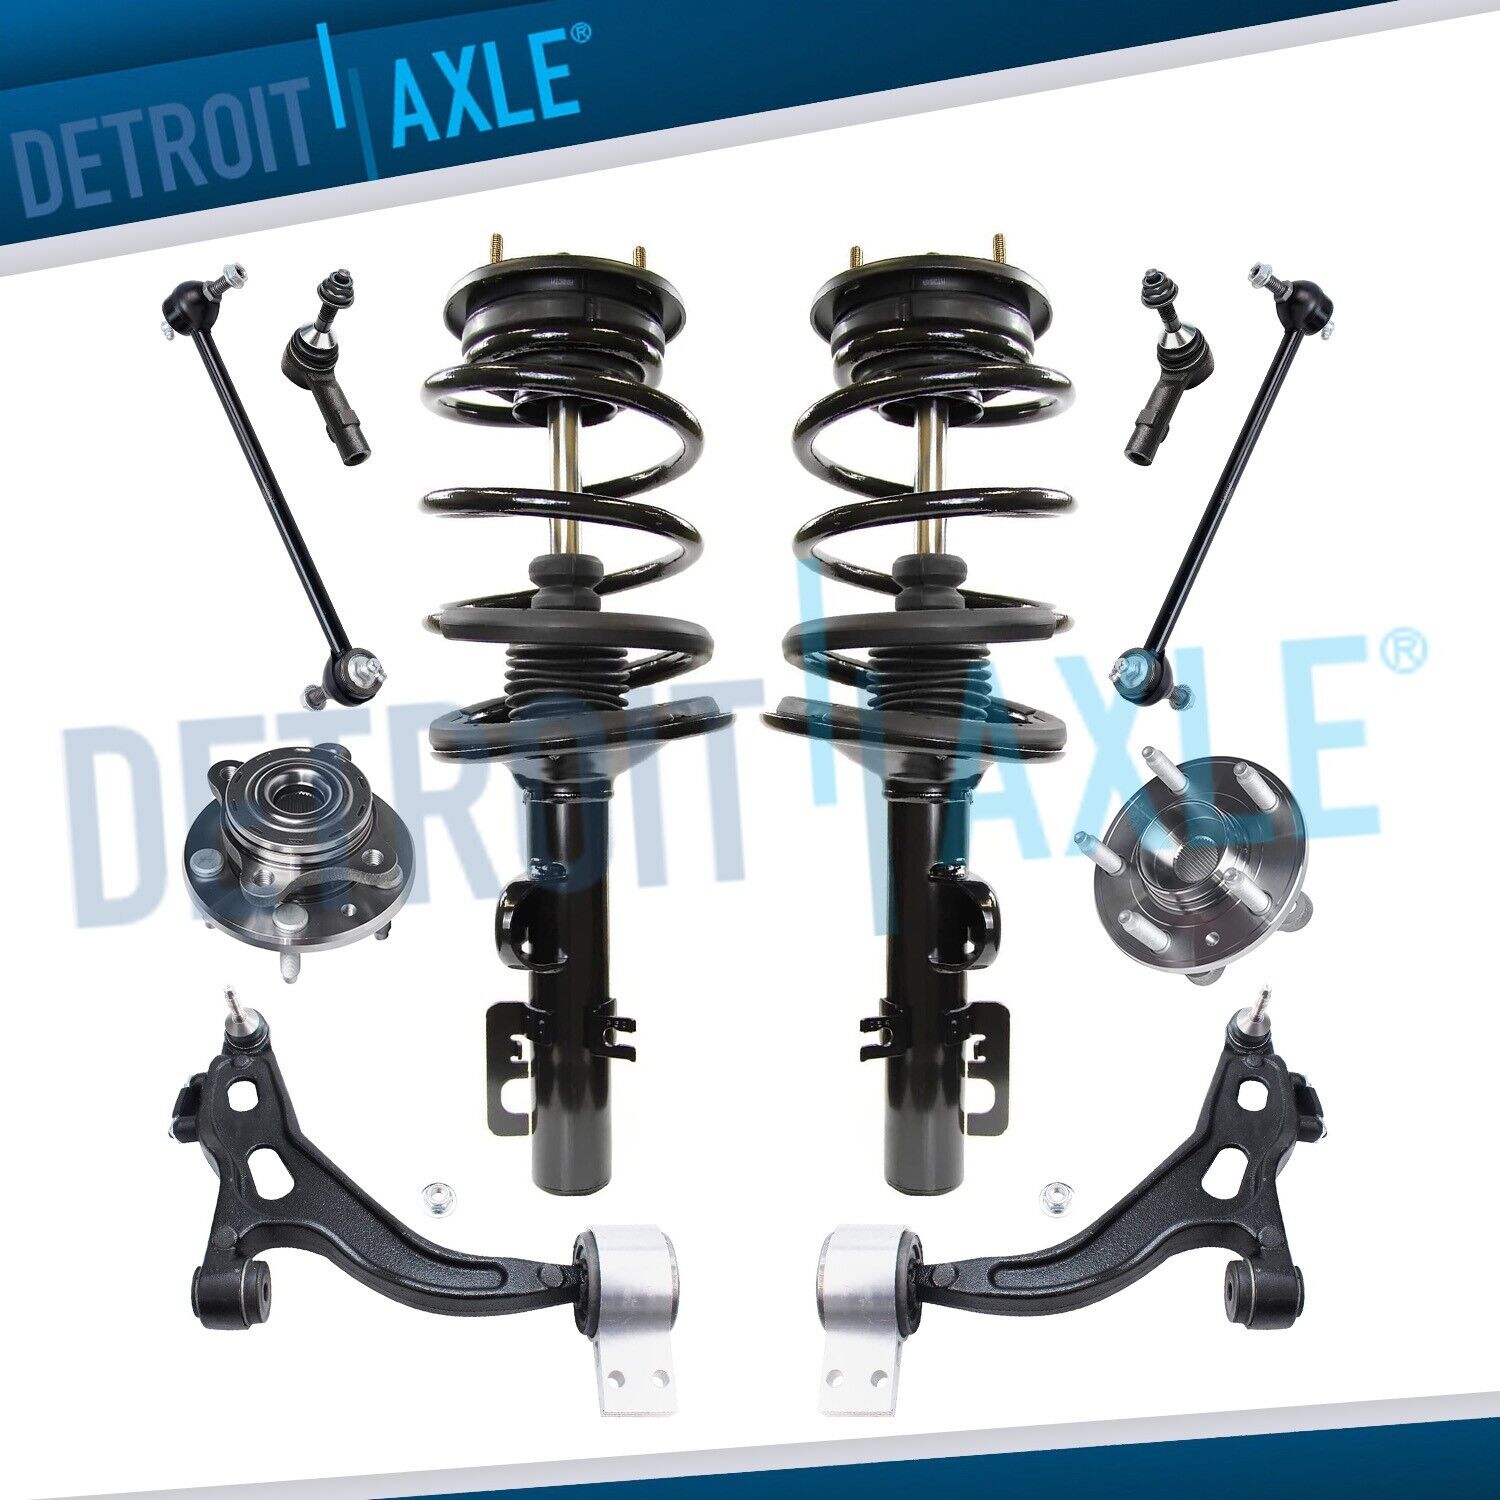 Front Struts Lower Control Arms Wheel Hubs for 2005-07 Five Hundred Montego AWD